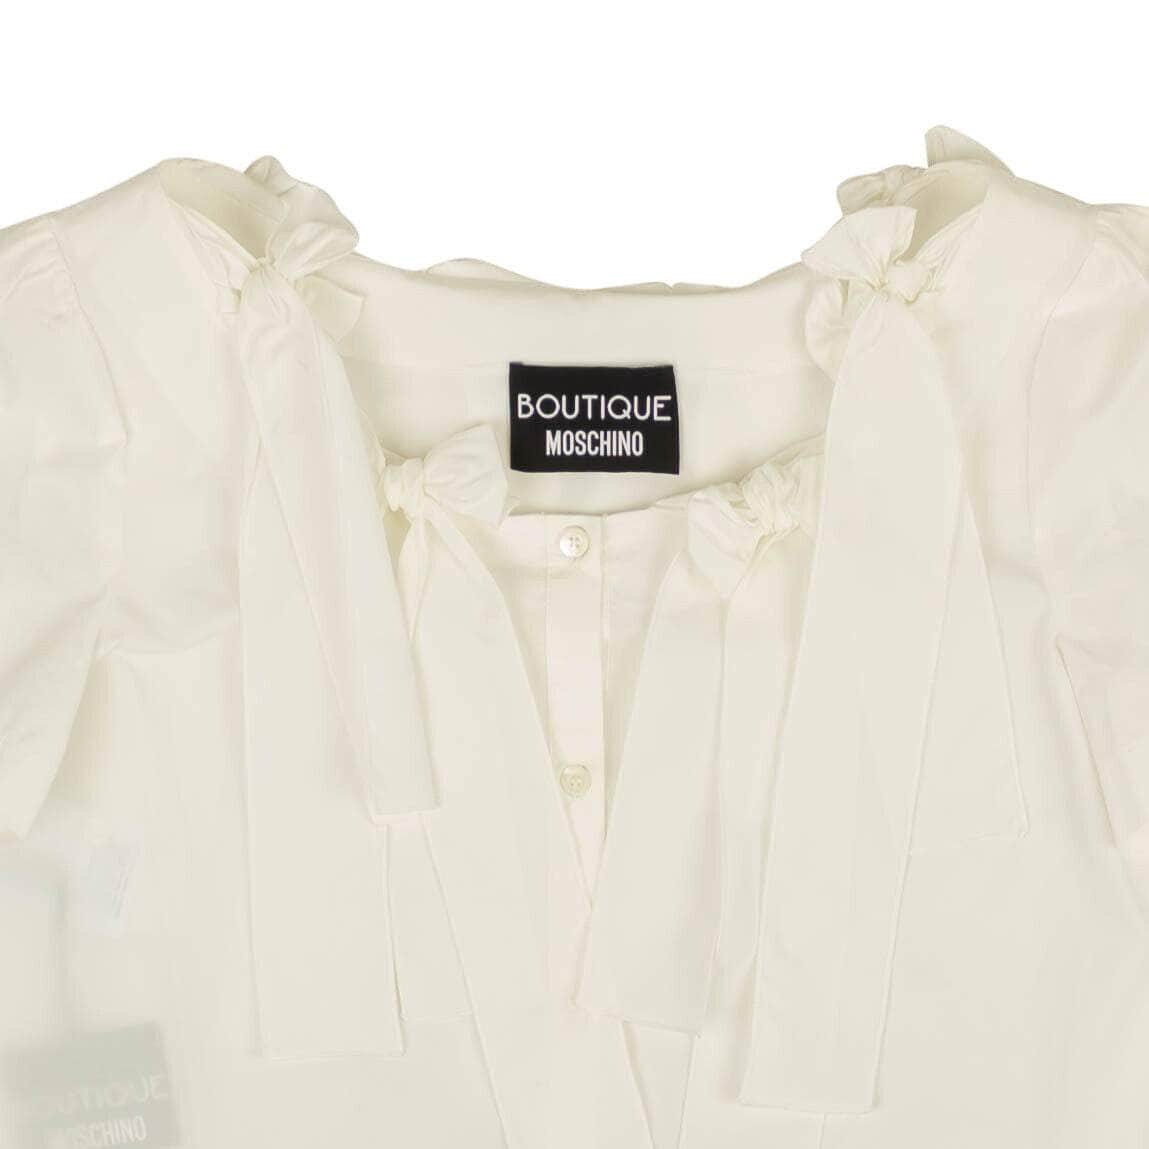 BOUTIQUE MOSCHINO boutique-moschino, channelenable-all, chicmi, couponcollection, gender-womens, main-clothing, size-44, size-46, under-250, womens-blouses 46 White Bow Accented Short Sleeve Blouse 95-BMS-1023/46 95-BMS-1023/46